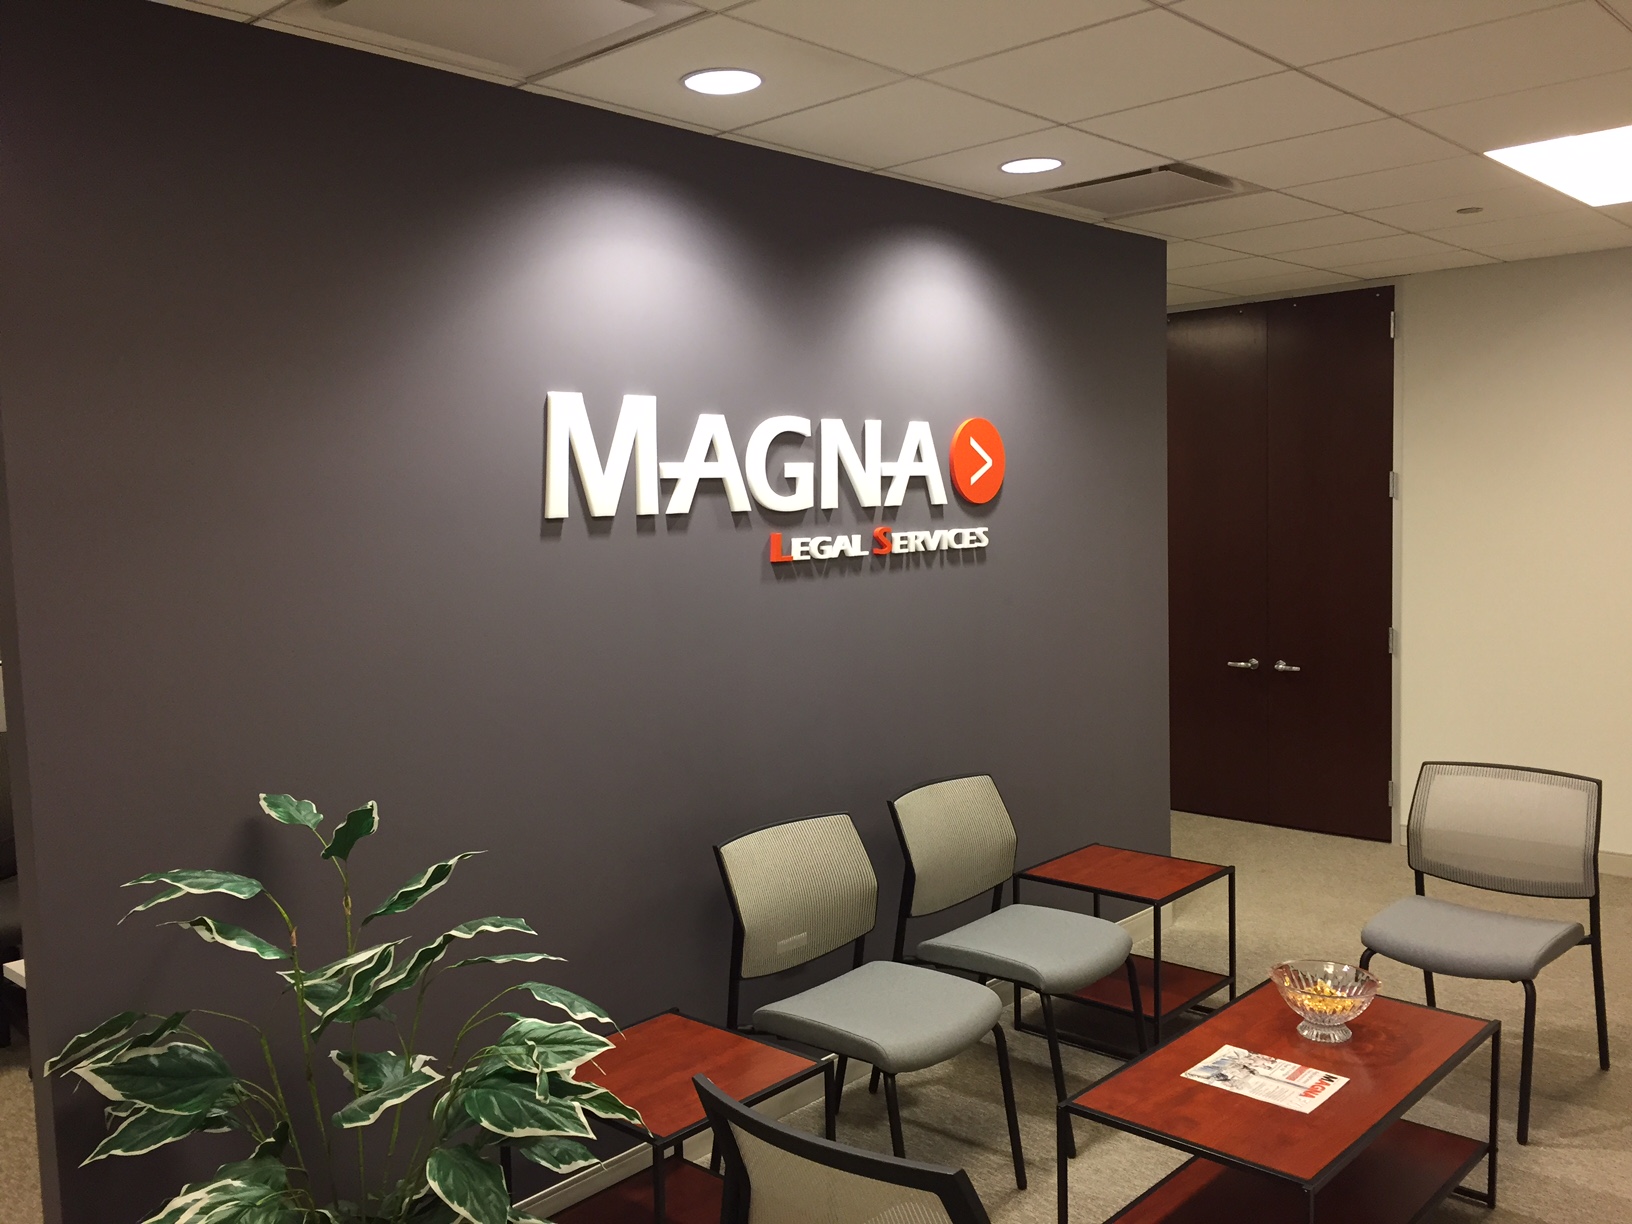 Office waiting room with chairs, a table and a plant in front of a dark wall that says Magna Legal Services in white.